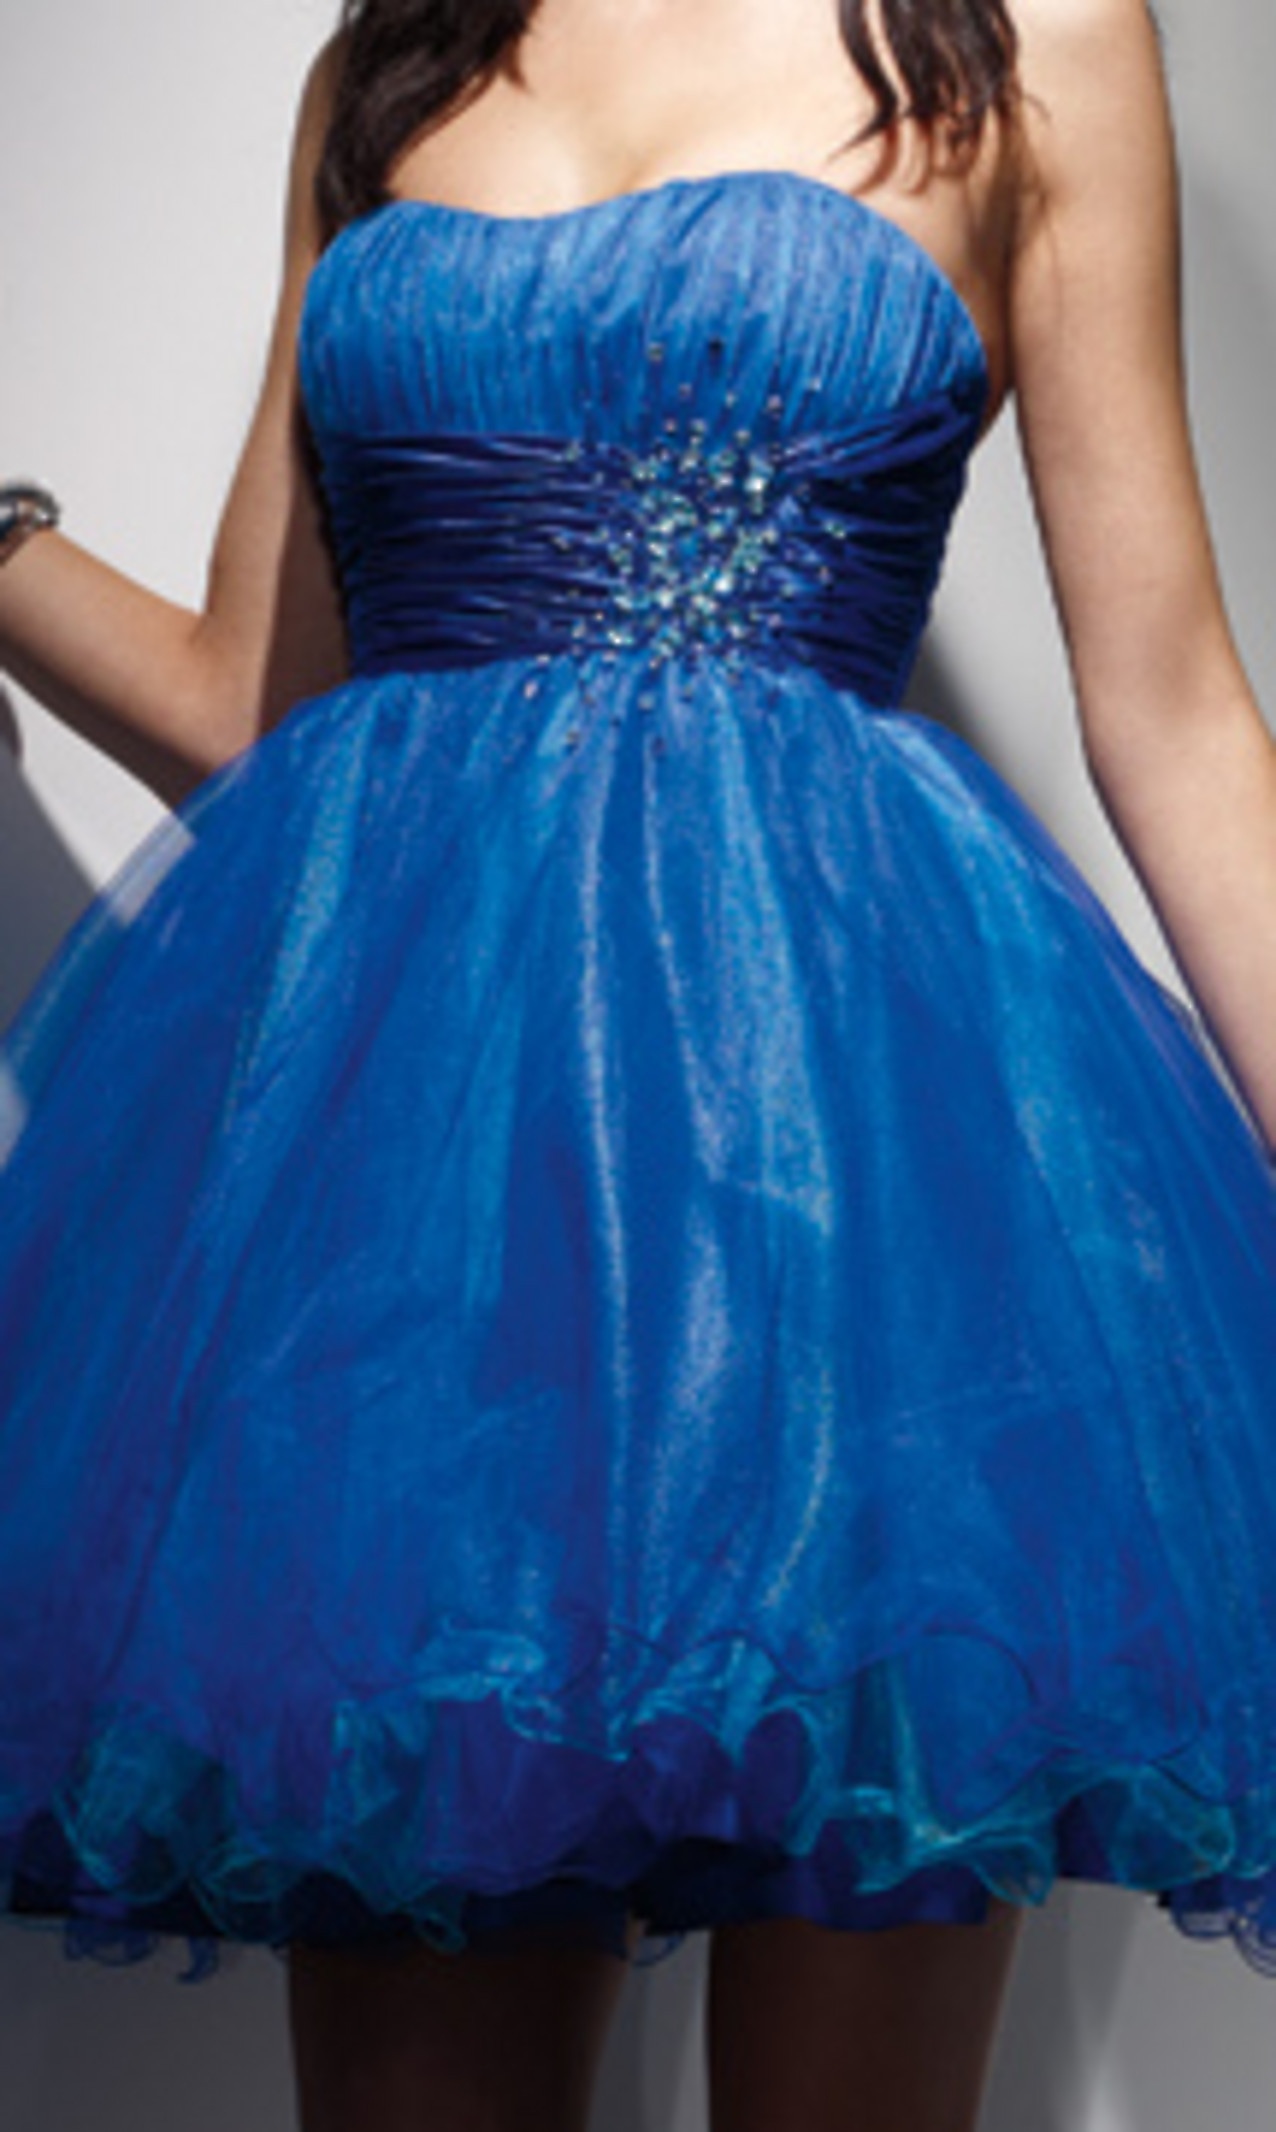 Strapless Dark Royal Blue A-Line Homecoming Gown of Satin Sash and Rhinestones